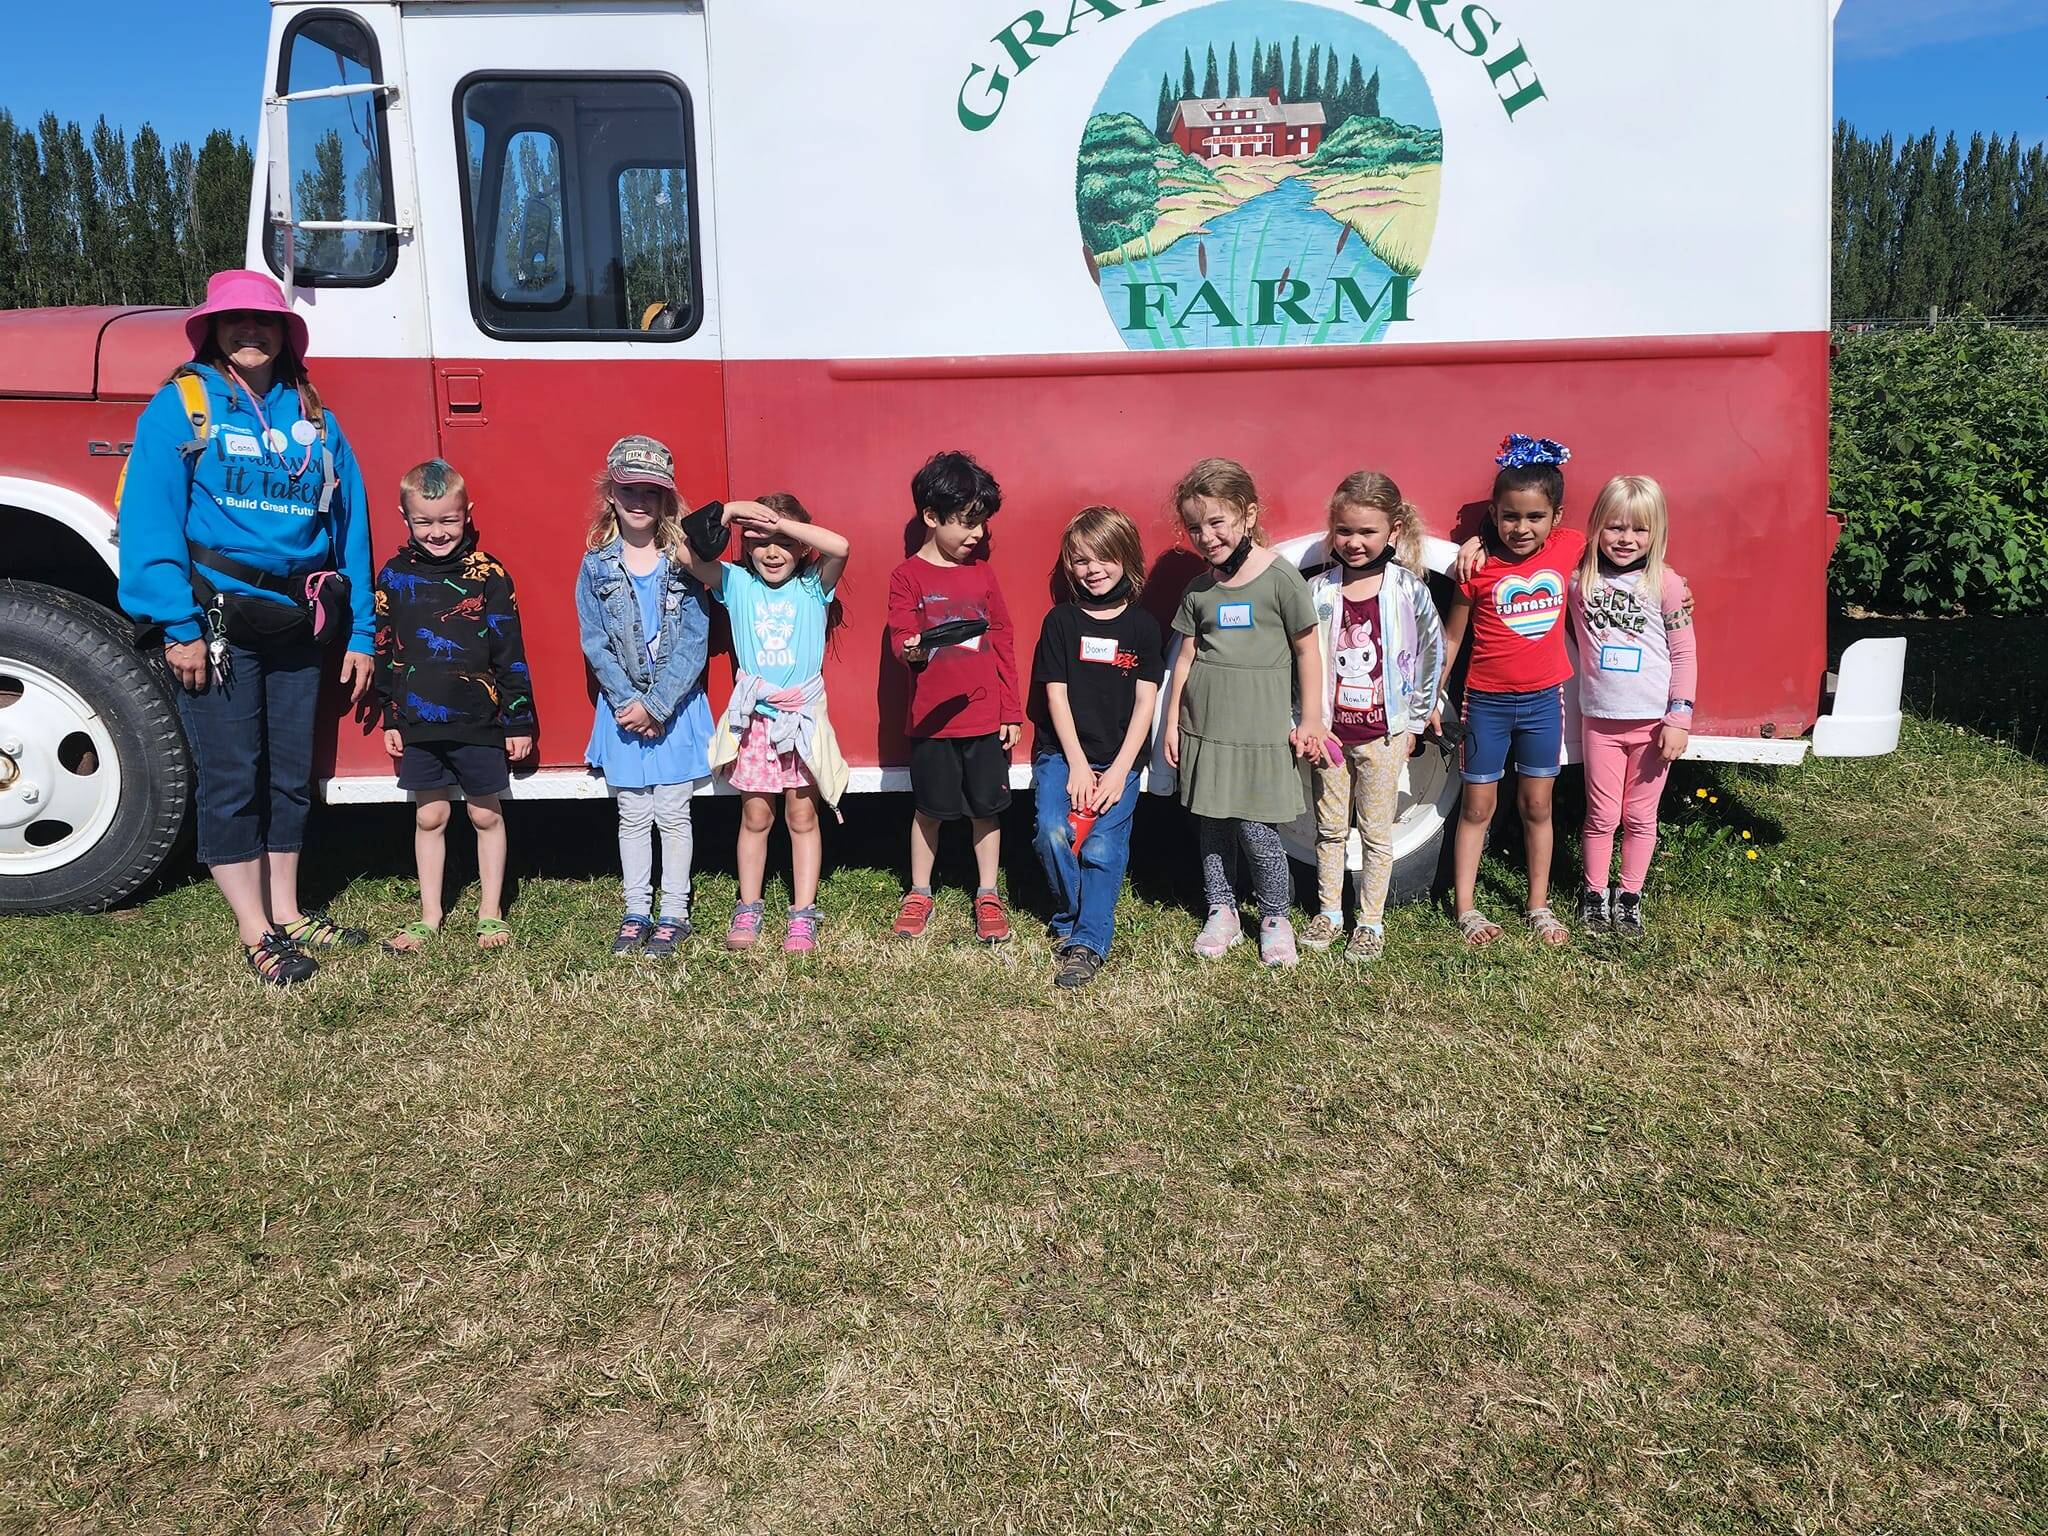 Submitted photo
Boys & Girls Club members in kindergarten and first grade visited Graysmarsh Farm in recent weeks as part of their summer field trip program.